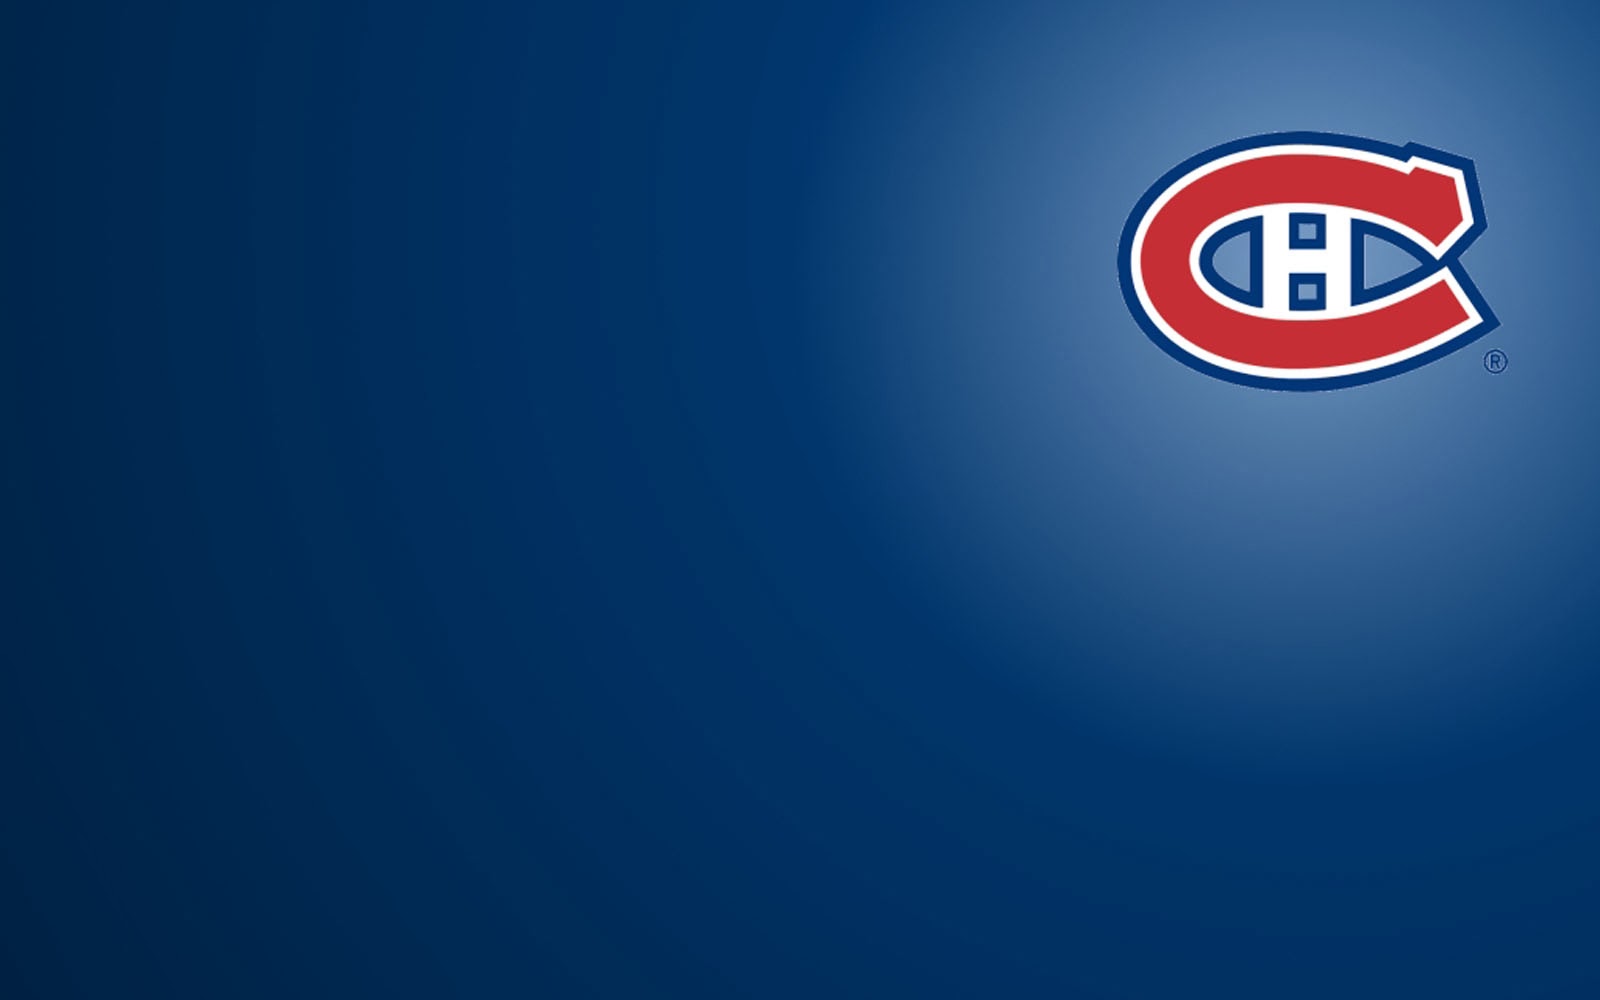 The Montreal Canadiens Wallpaper In Category Of Sports